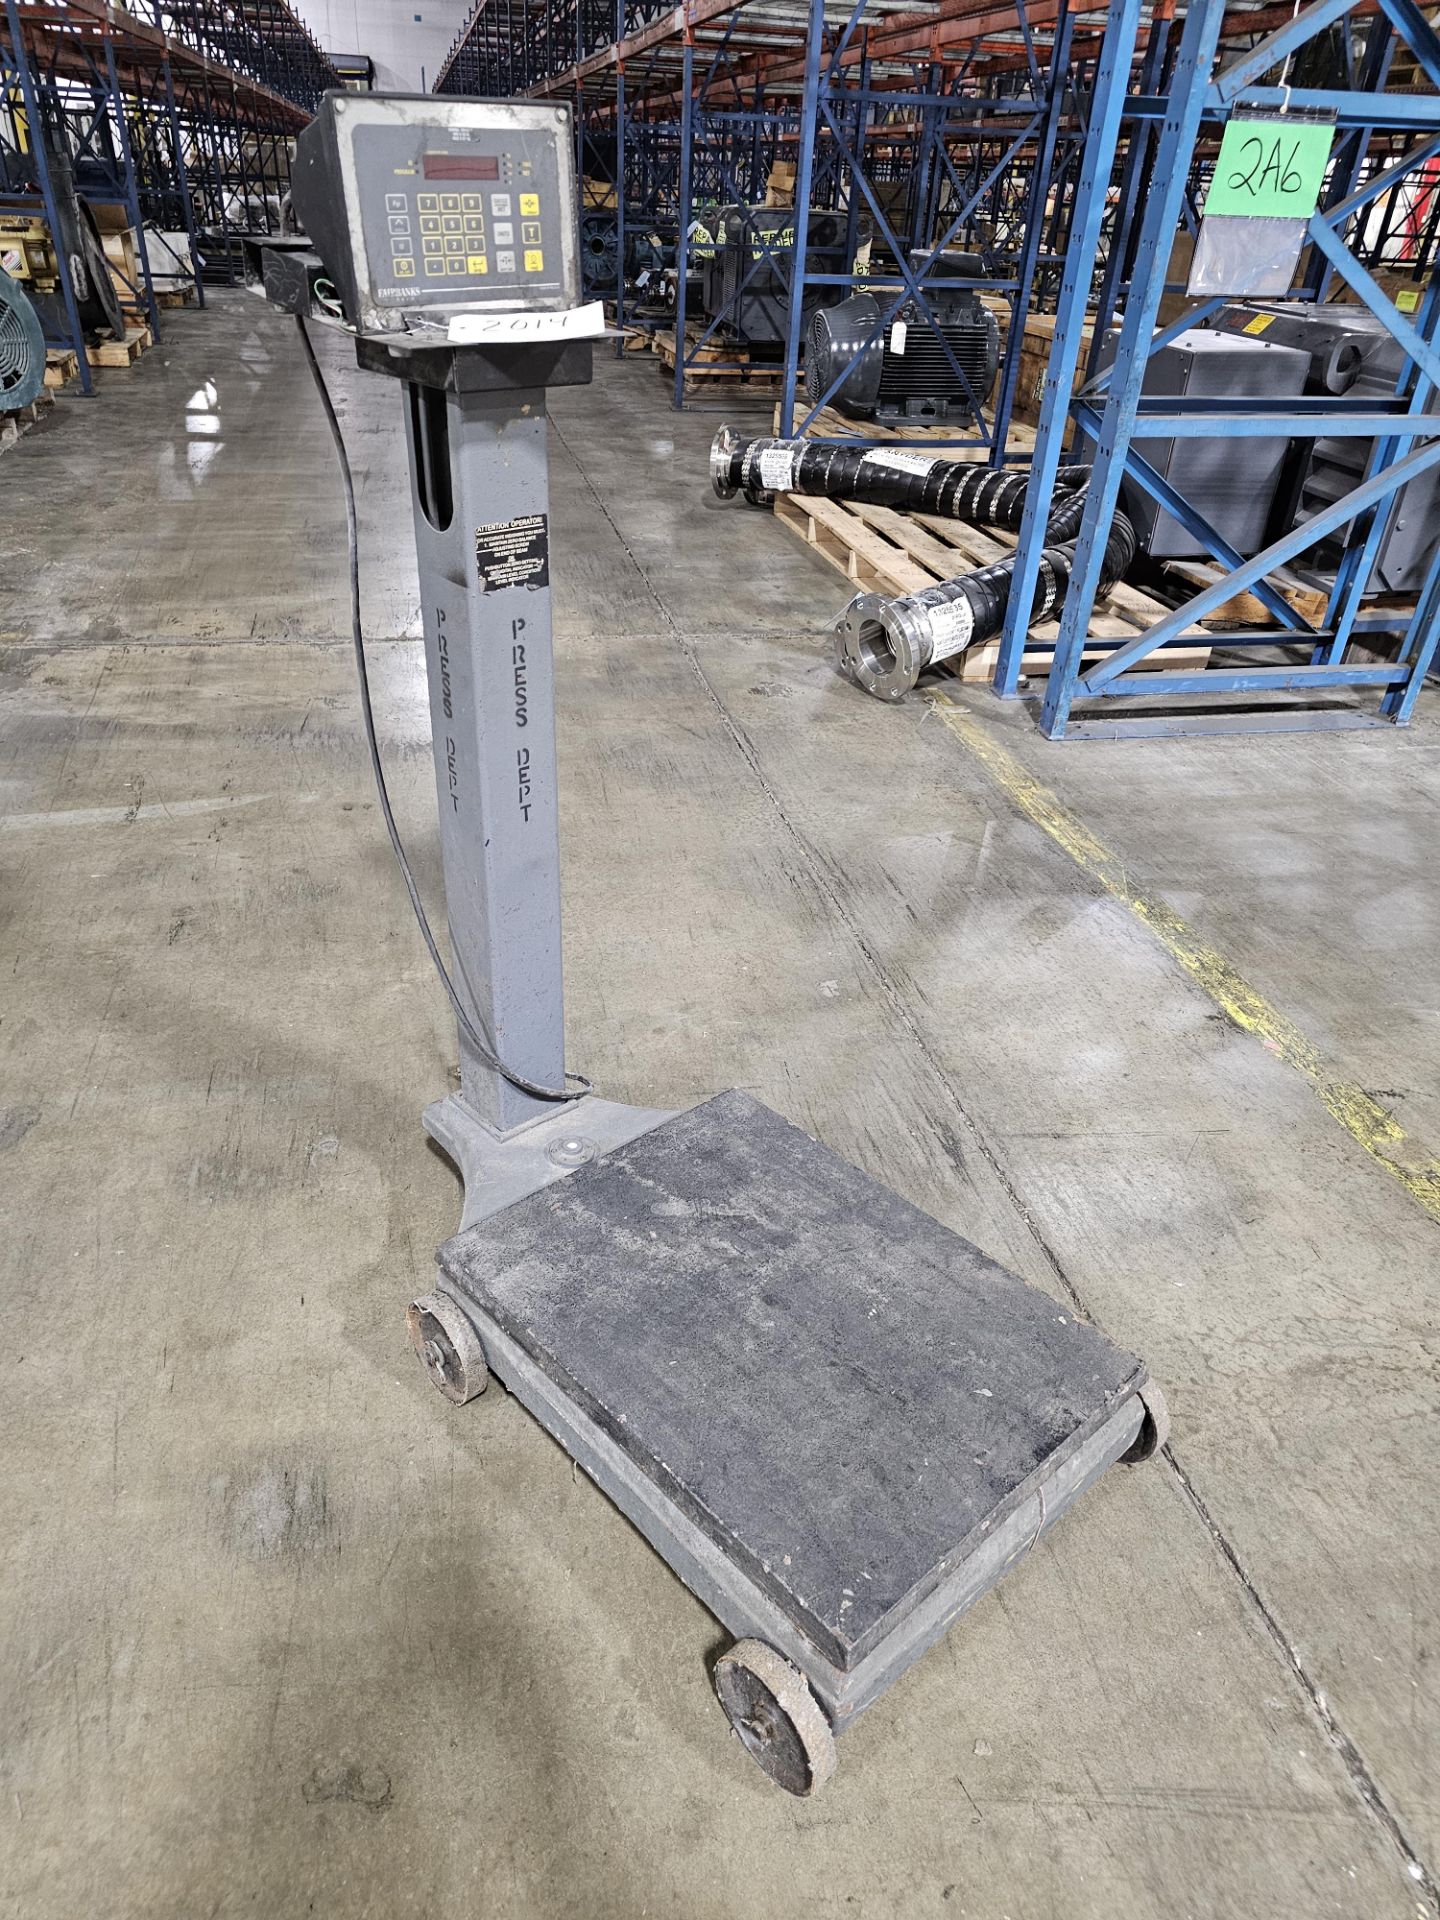 Fairbanks Scales Series 2300 Industrial Scale - Image 2 of 5